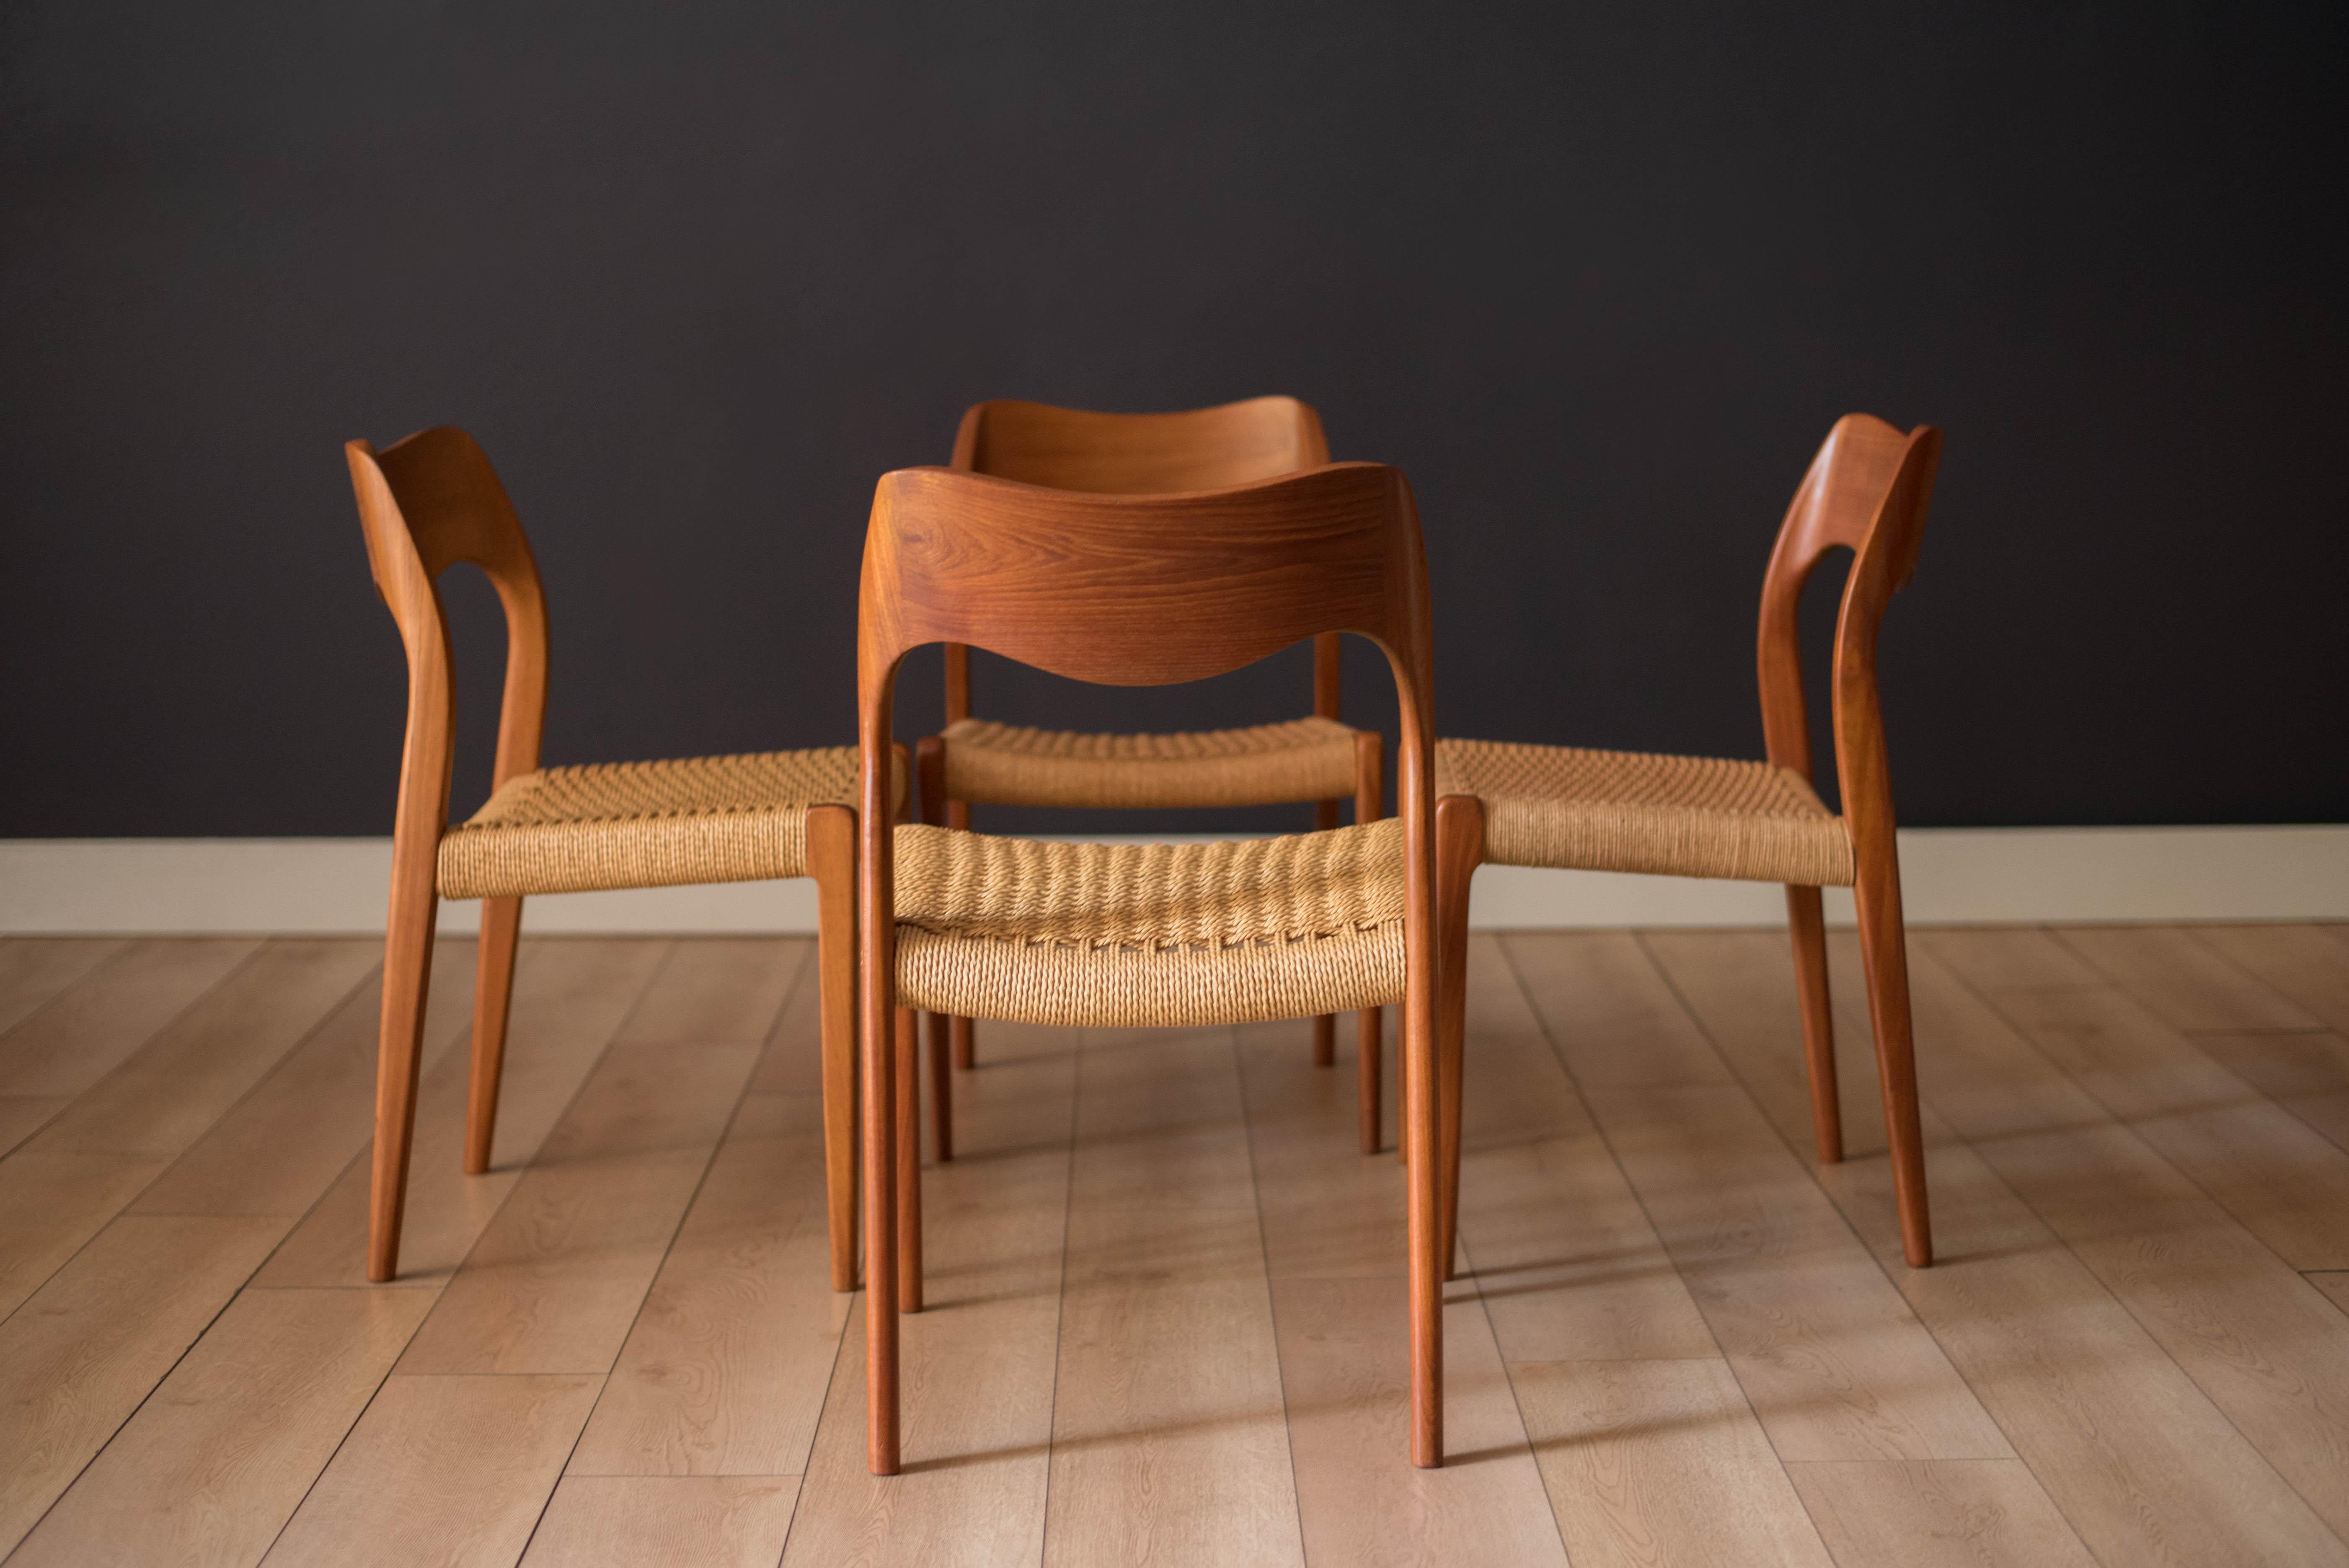 Mid Century Modern dining chairs by Niels O. Møller for J.L. Møller Møbelfabrik model no. 71, Denmark. This set features sculpted teak frames and retains the original paper cord seats. Price is for the set of four.